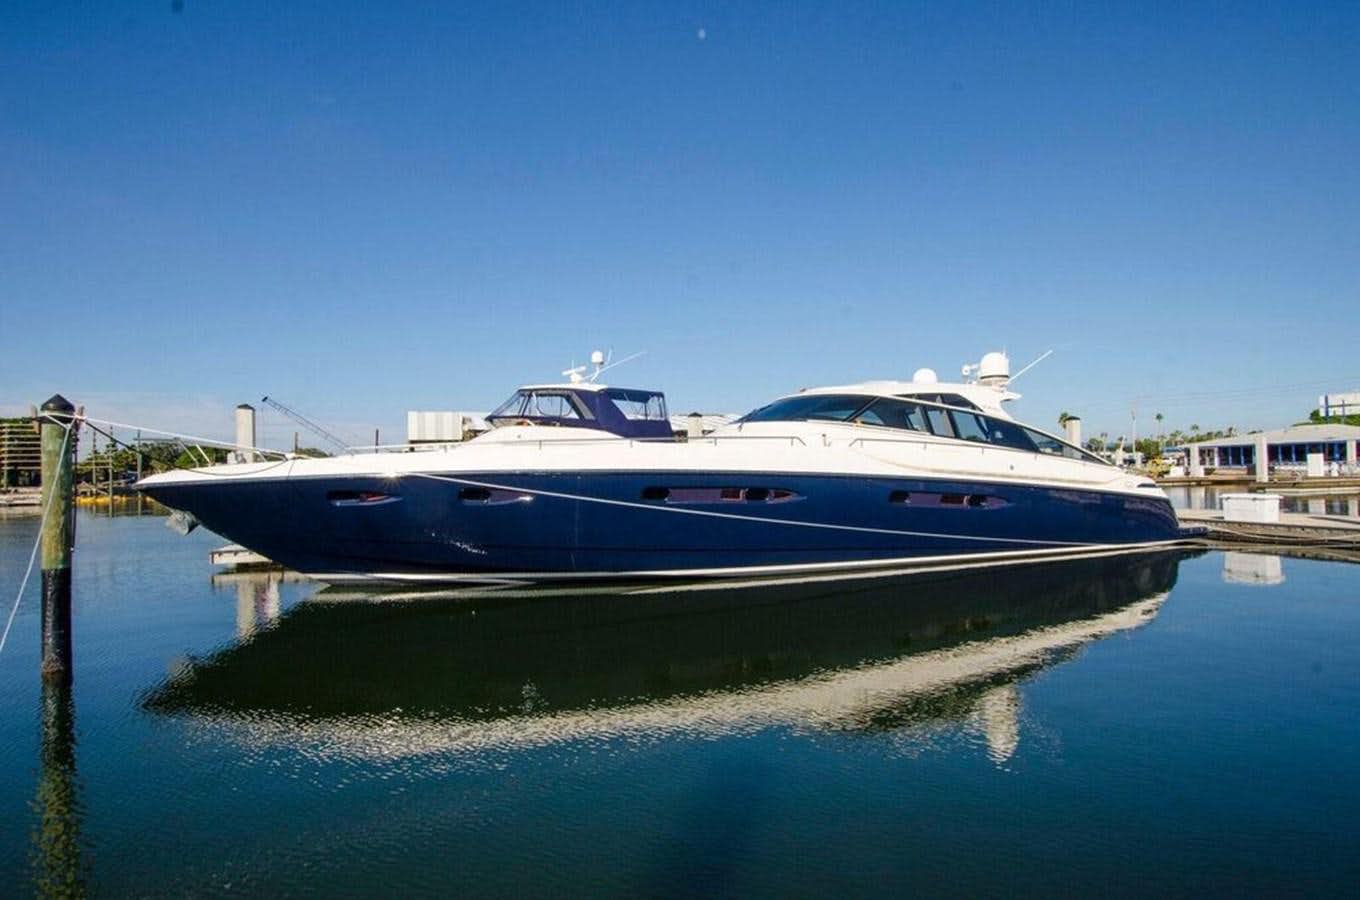 Divine madness
Yacht for Sale